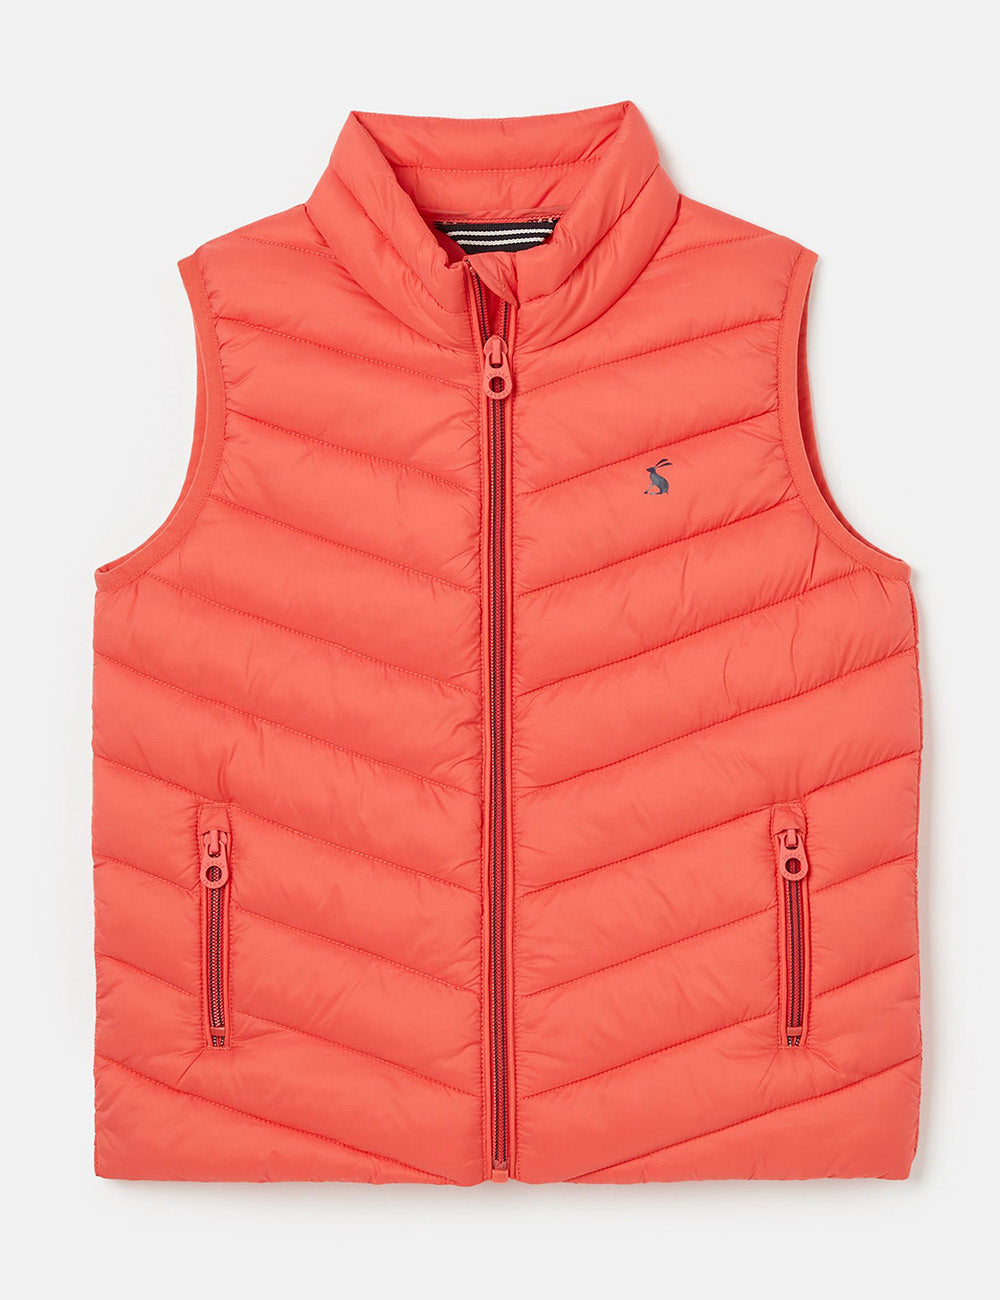 Joules Croft Packable Gilet - Dusty Red